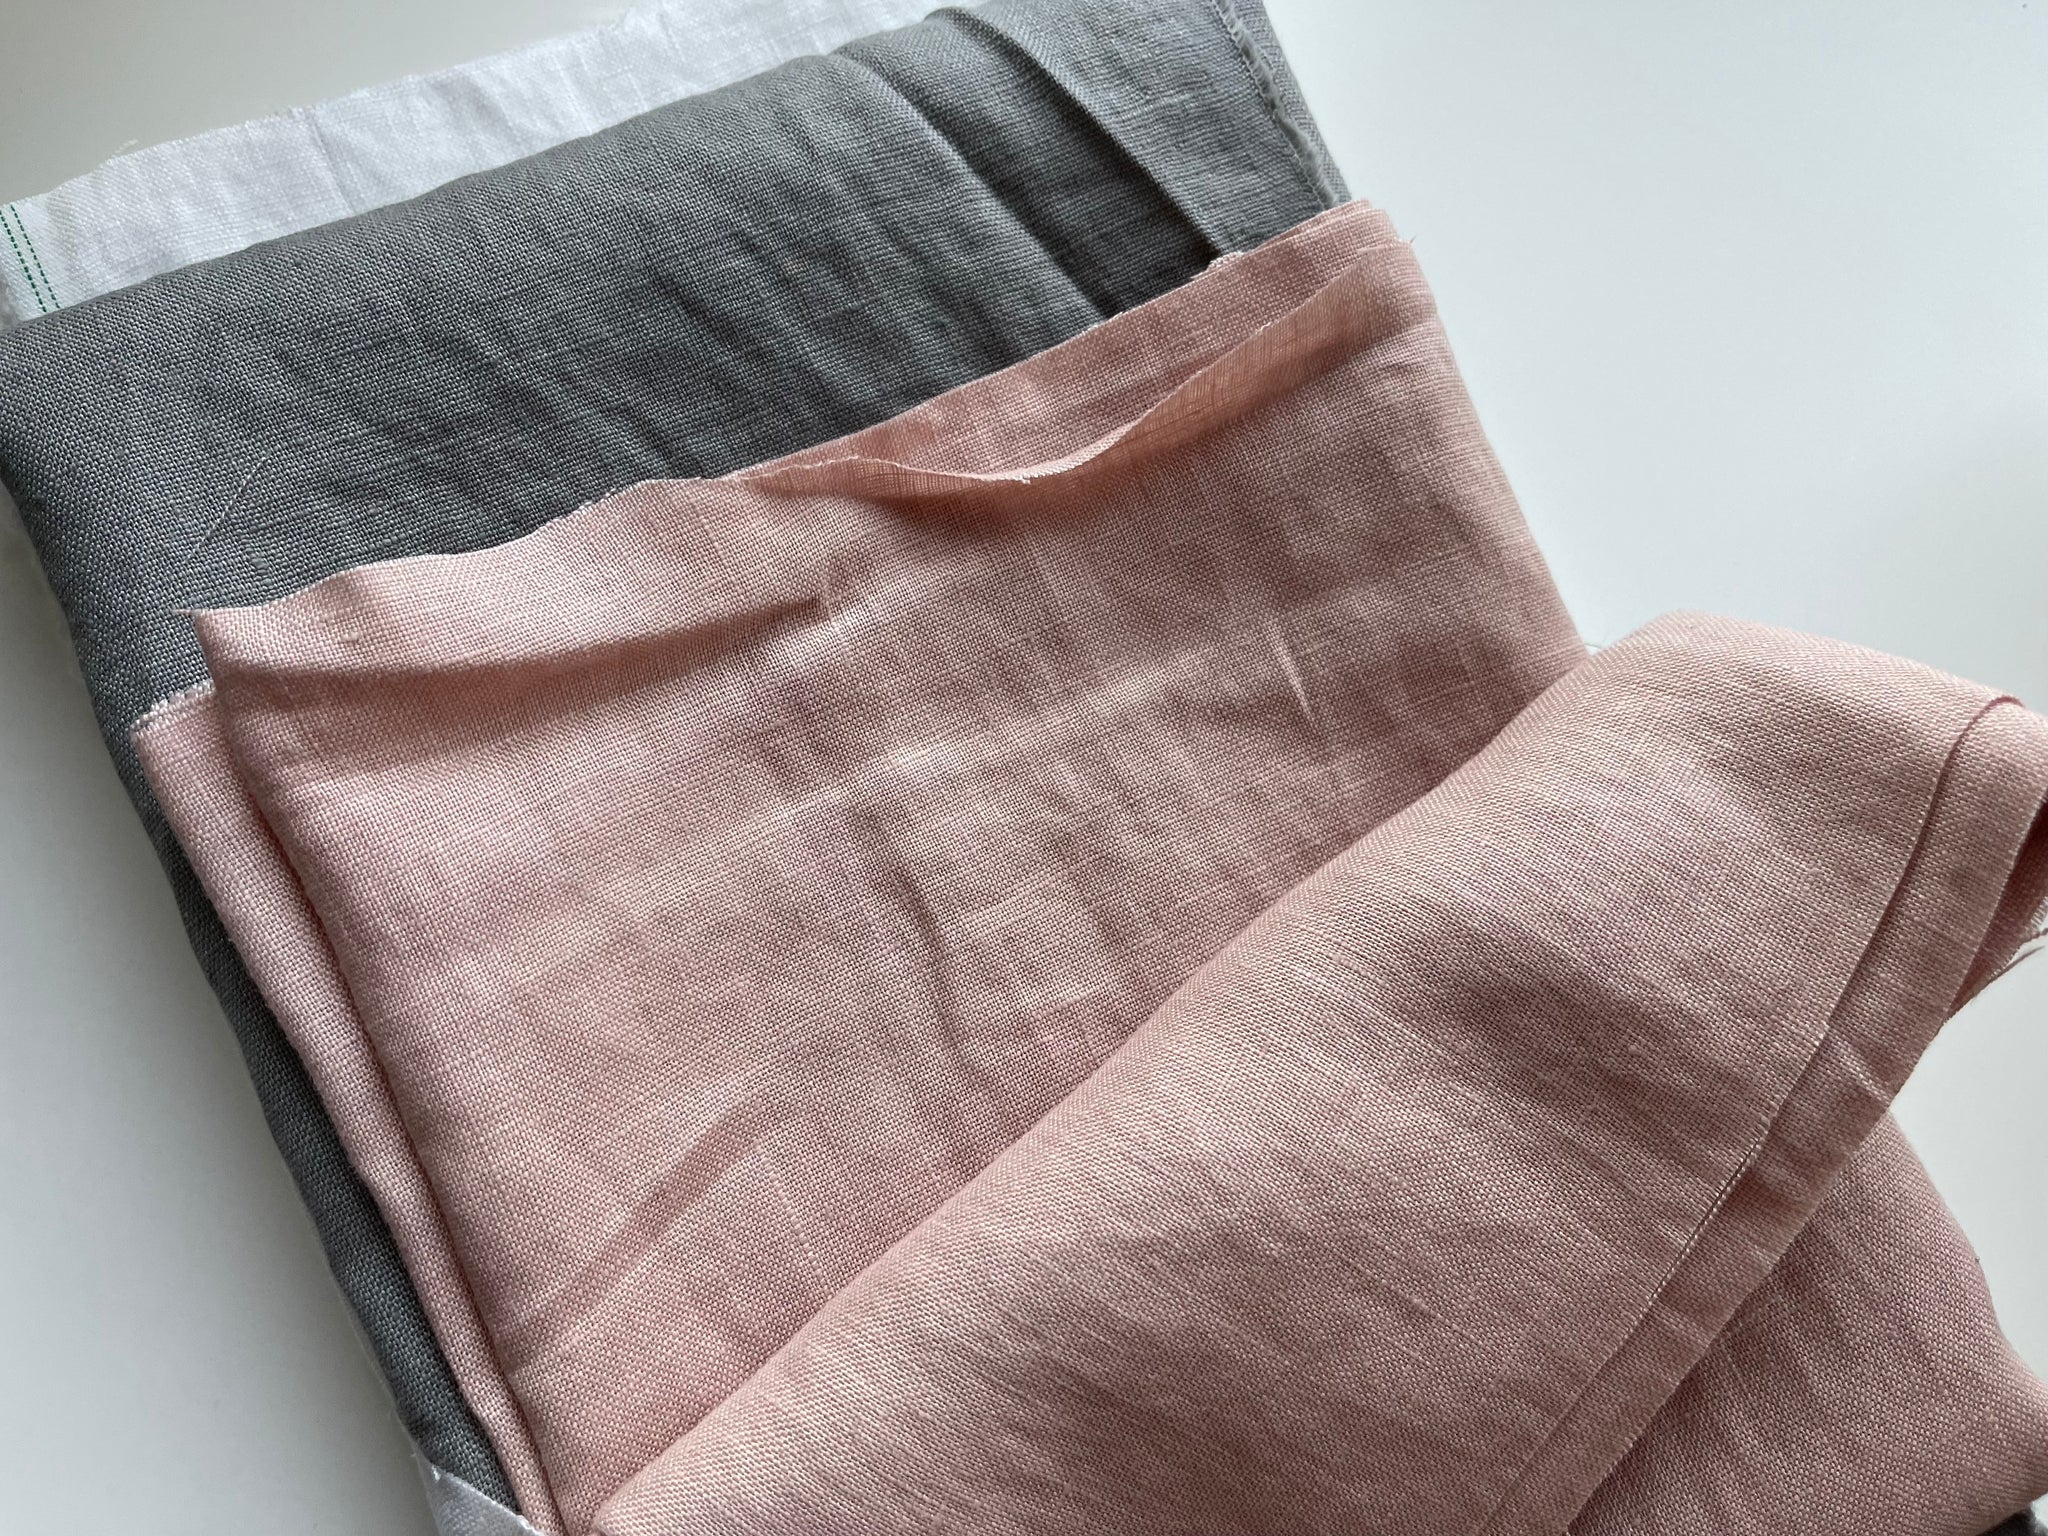 Linen Fabric Remnants - Dusty Rose, Grey, Pure White